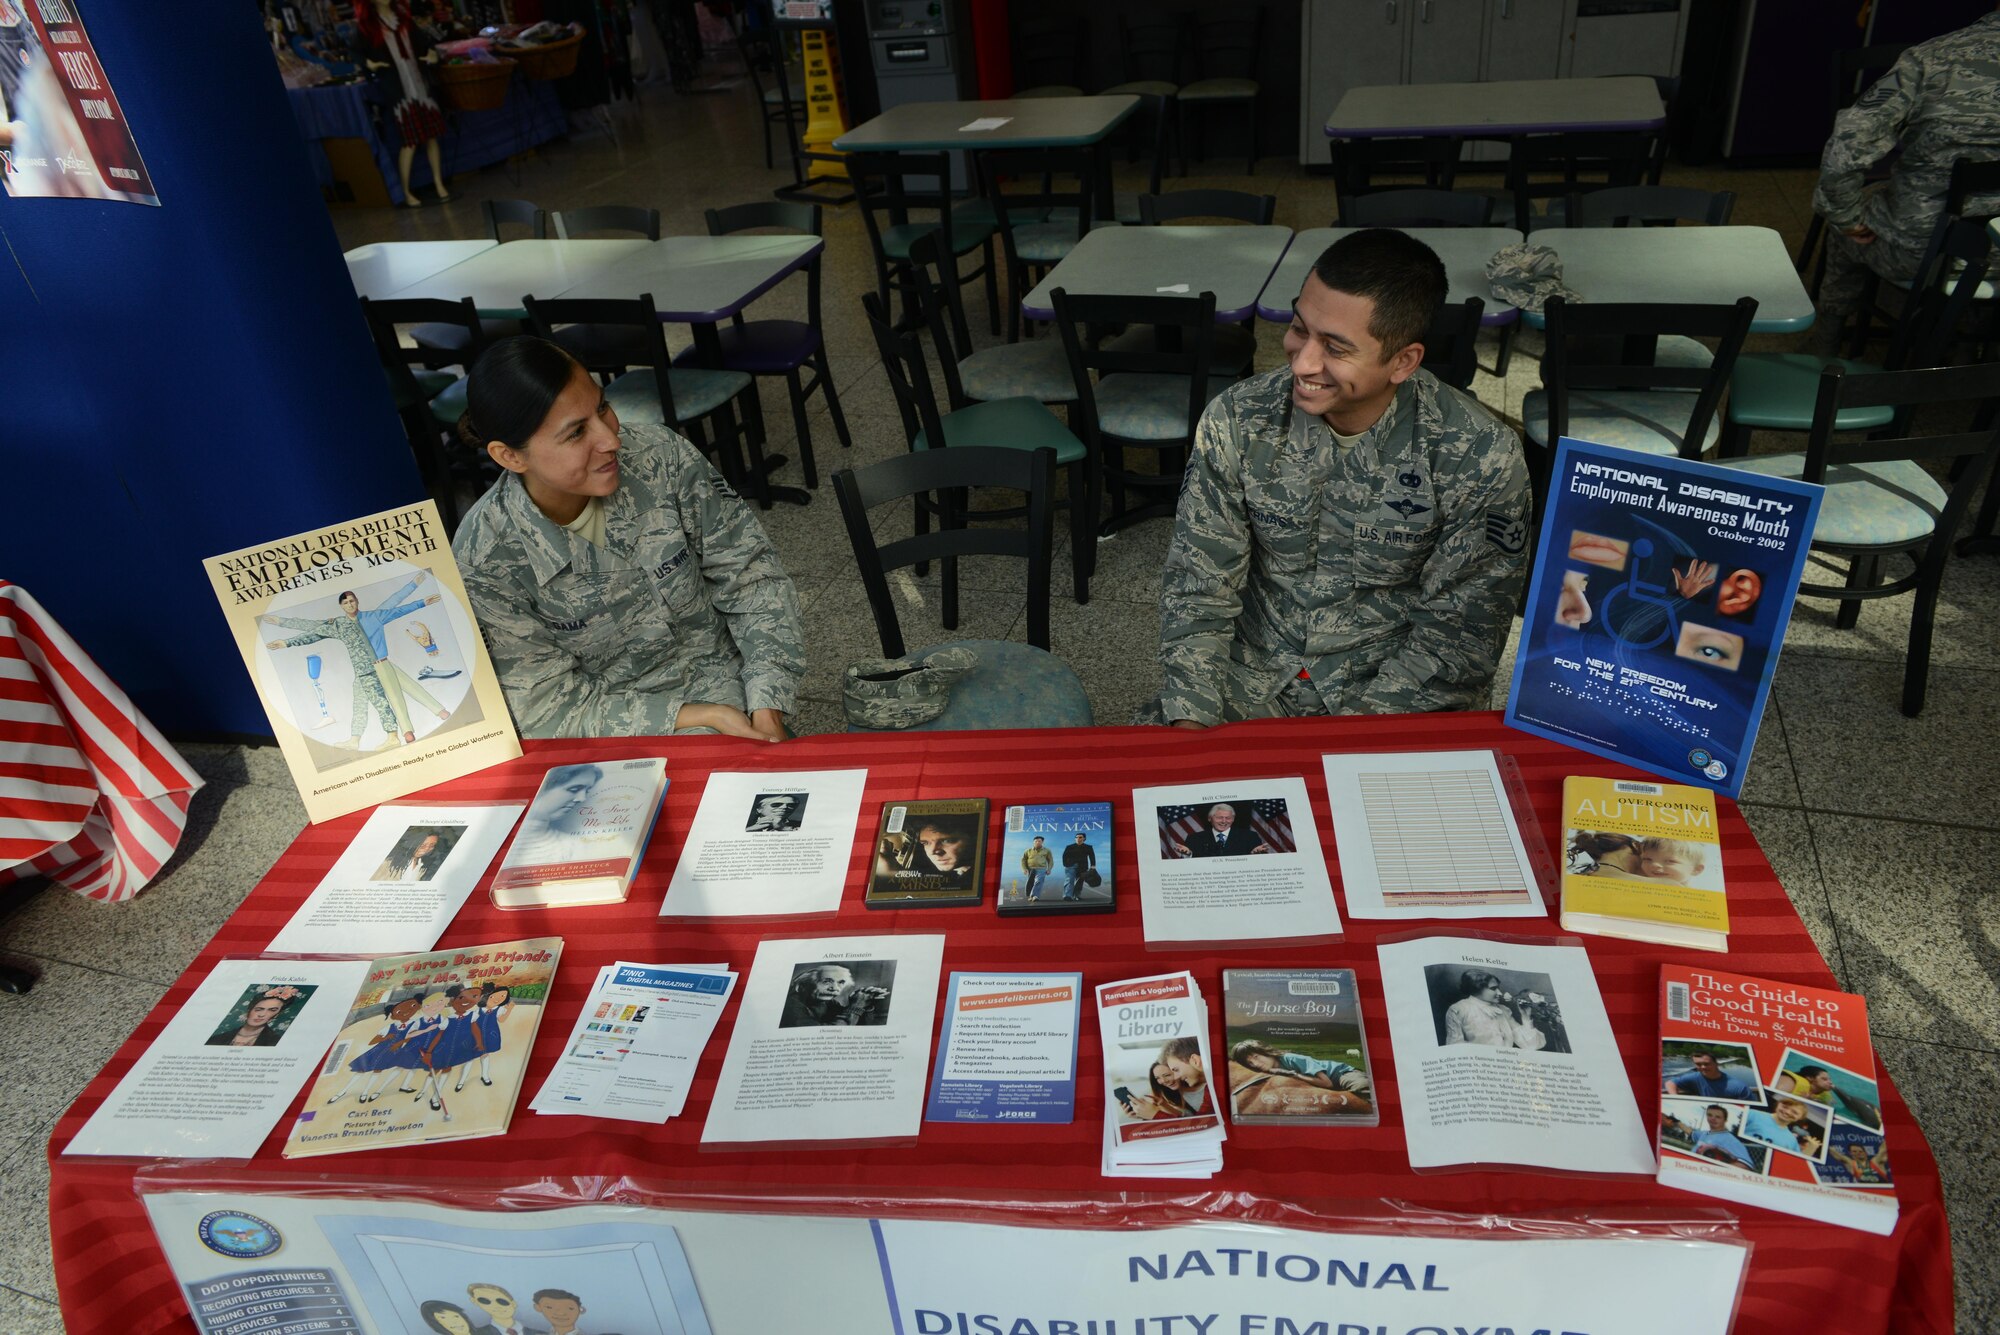 Staff Sgt. Blanca Gama, 86th Aeromedical Evacuation Squadron noncommissioned officer in charge of resource management (left), and Staff Sgt. Julio Parnas Jr., 86th Logistics Readiness Squadron cargo deployment function supervisor, volunteer at an educational booth for National Disability Employment Awareness Month at Ramstein Air Base, Germany, Oct. 5, 2016. NDEAM aims to give voice to people who may be struggling to find employment because of their physical, mental or emotional disabilities. (U.S. Air Force photo by Airman 1st Class Joshua Magbanua)